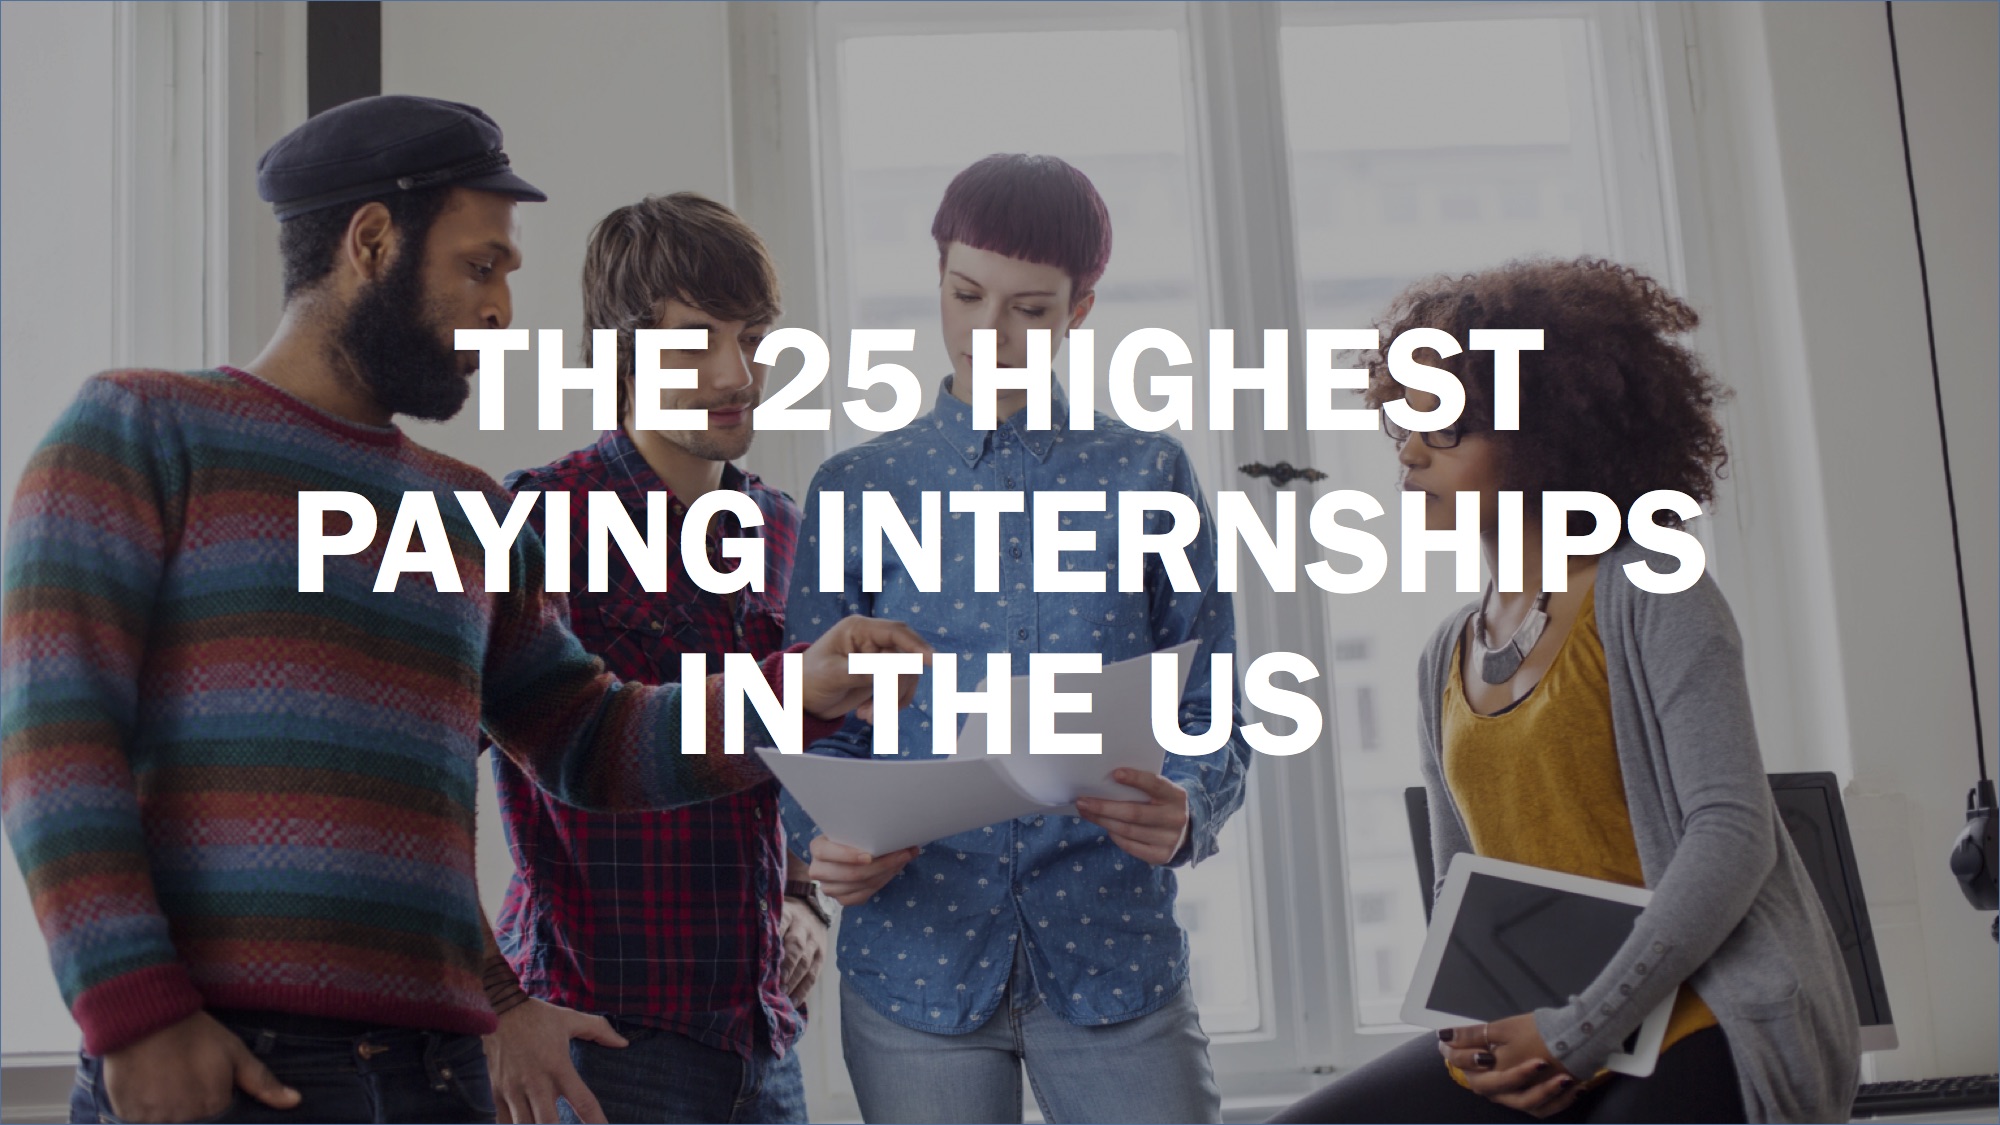 The 25 highest paying internships in the US 2017